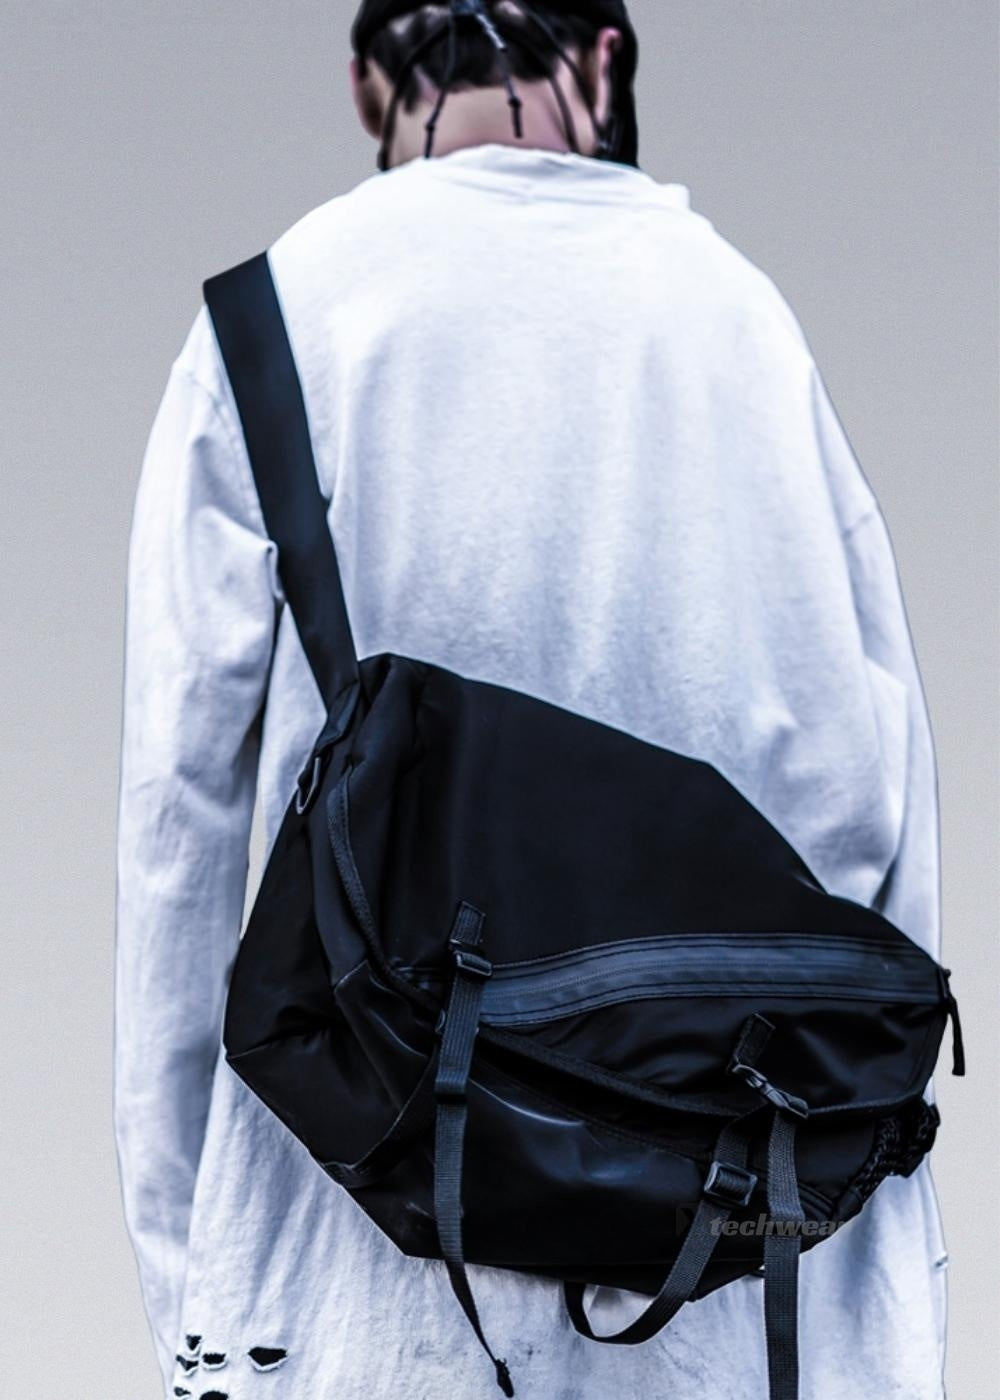 Heavy Industry Subculture Messenger Bags | Affordable Techwear